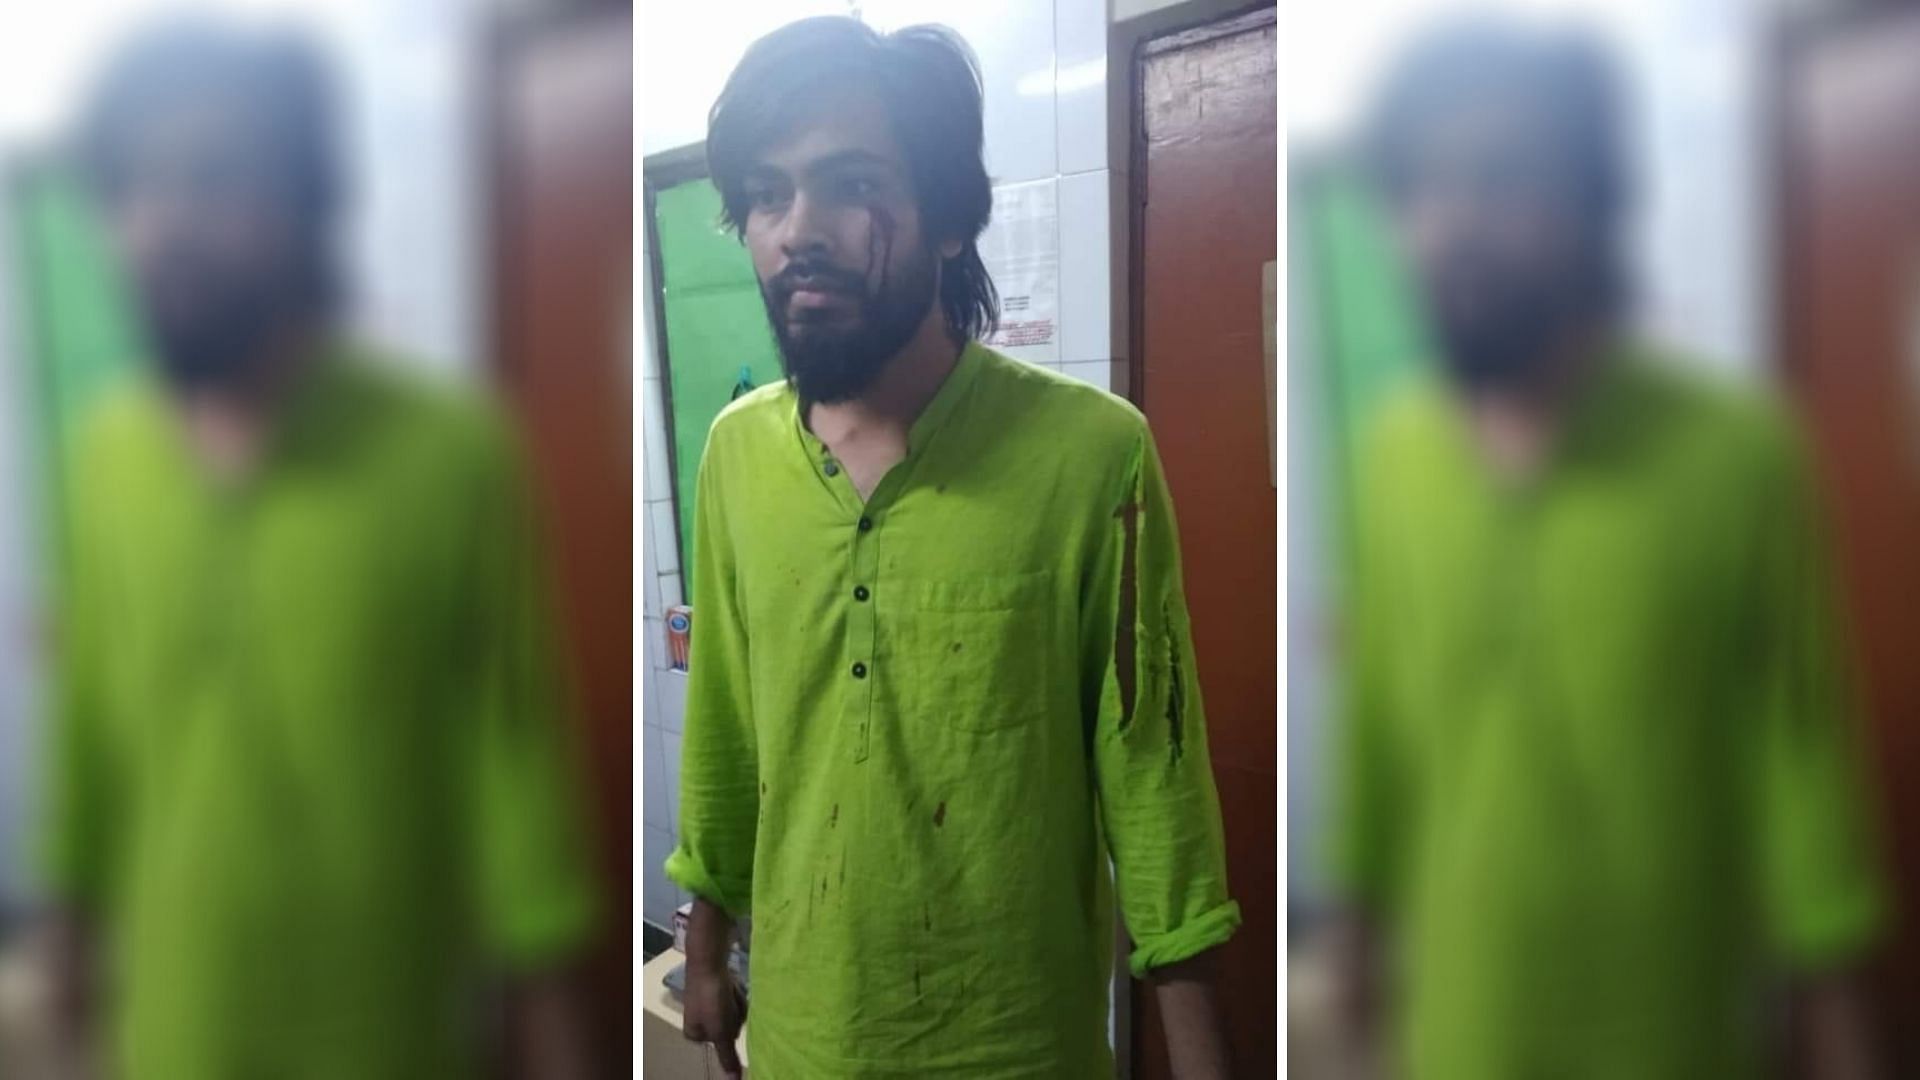  Vivek Pandey, a member of All India Students’ Association (AISA), has alleged that members of the ABVP beat him in his hostel “without provocation”.